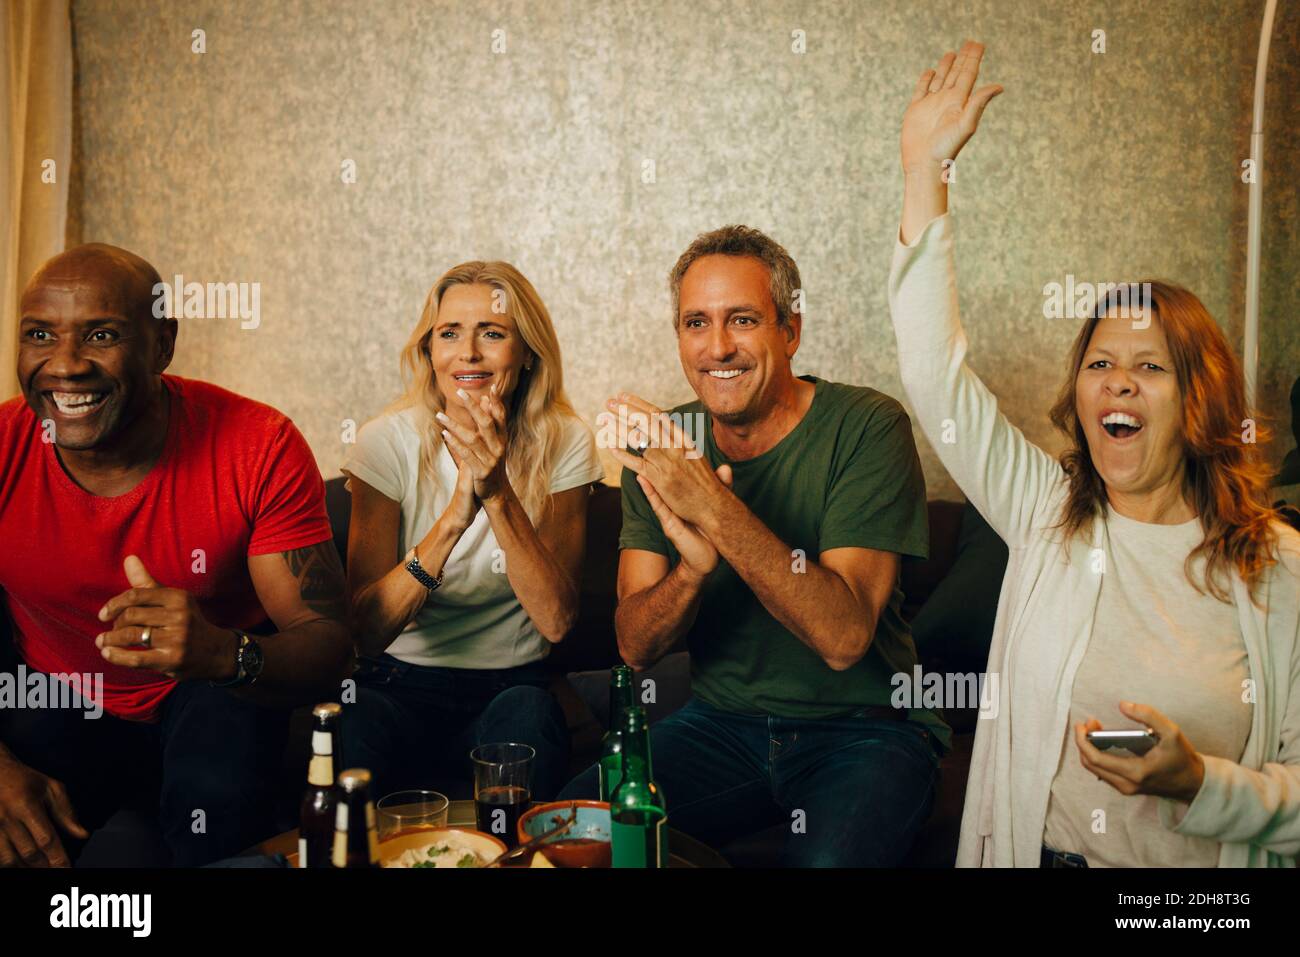 Cheerful woman with hand raised enjoying match with friends at night Stock Photo